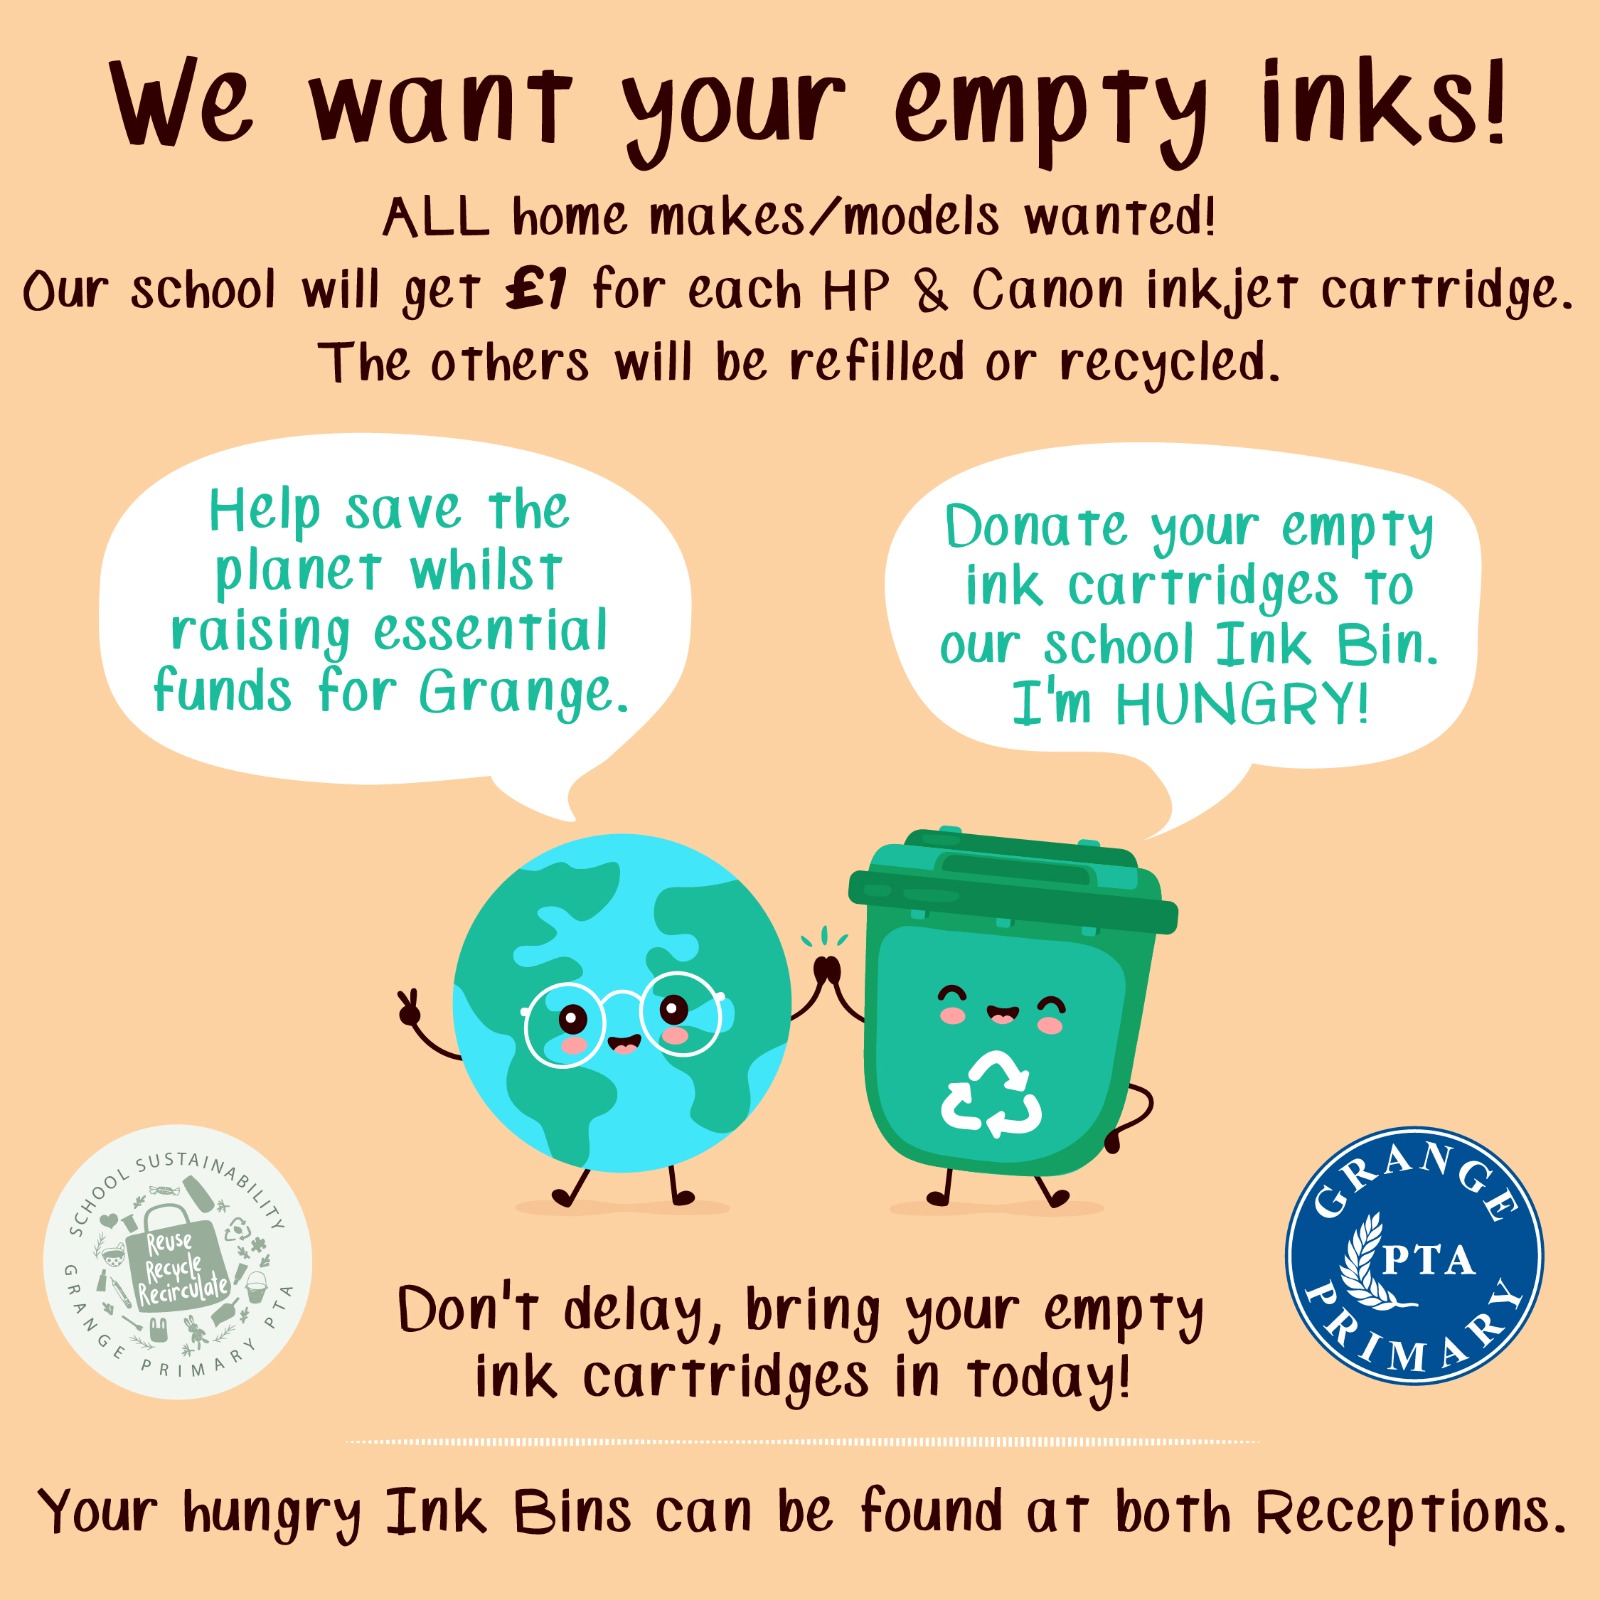 We want your empty inks!